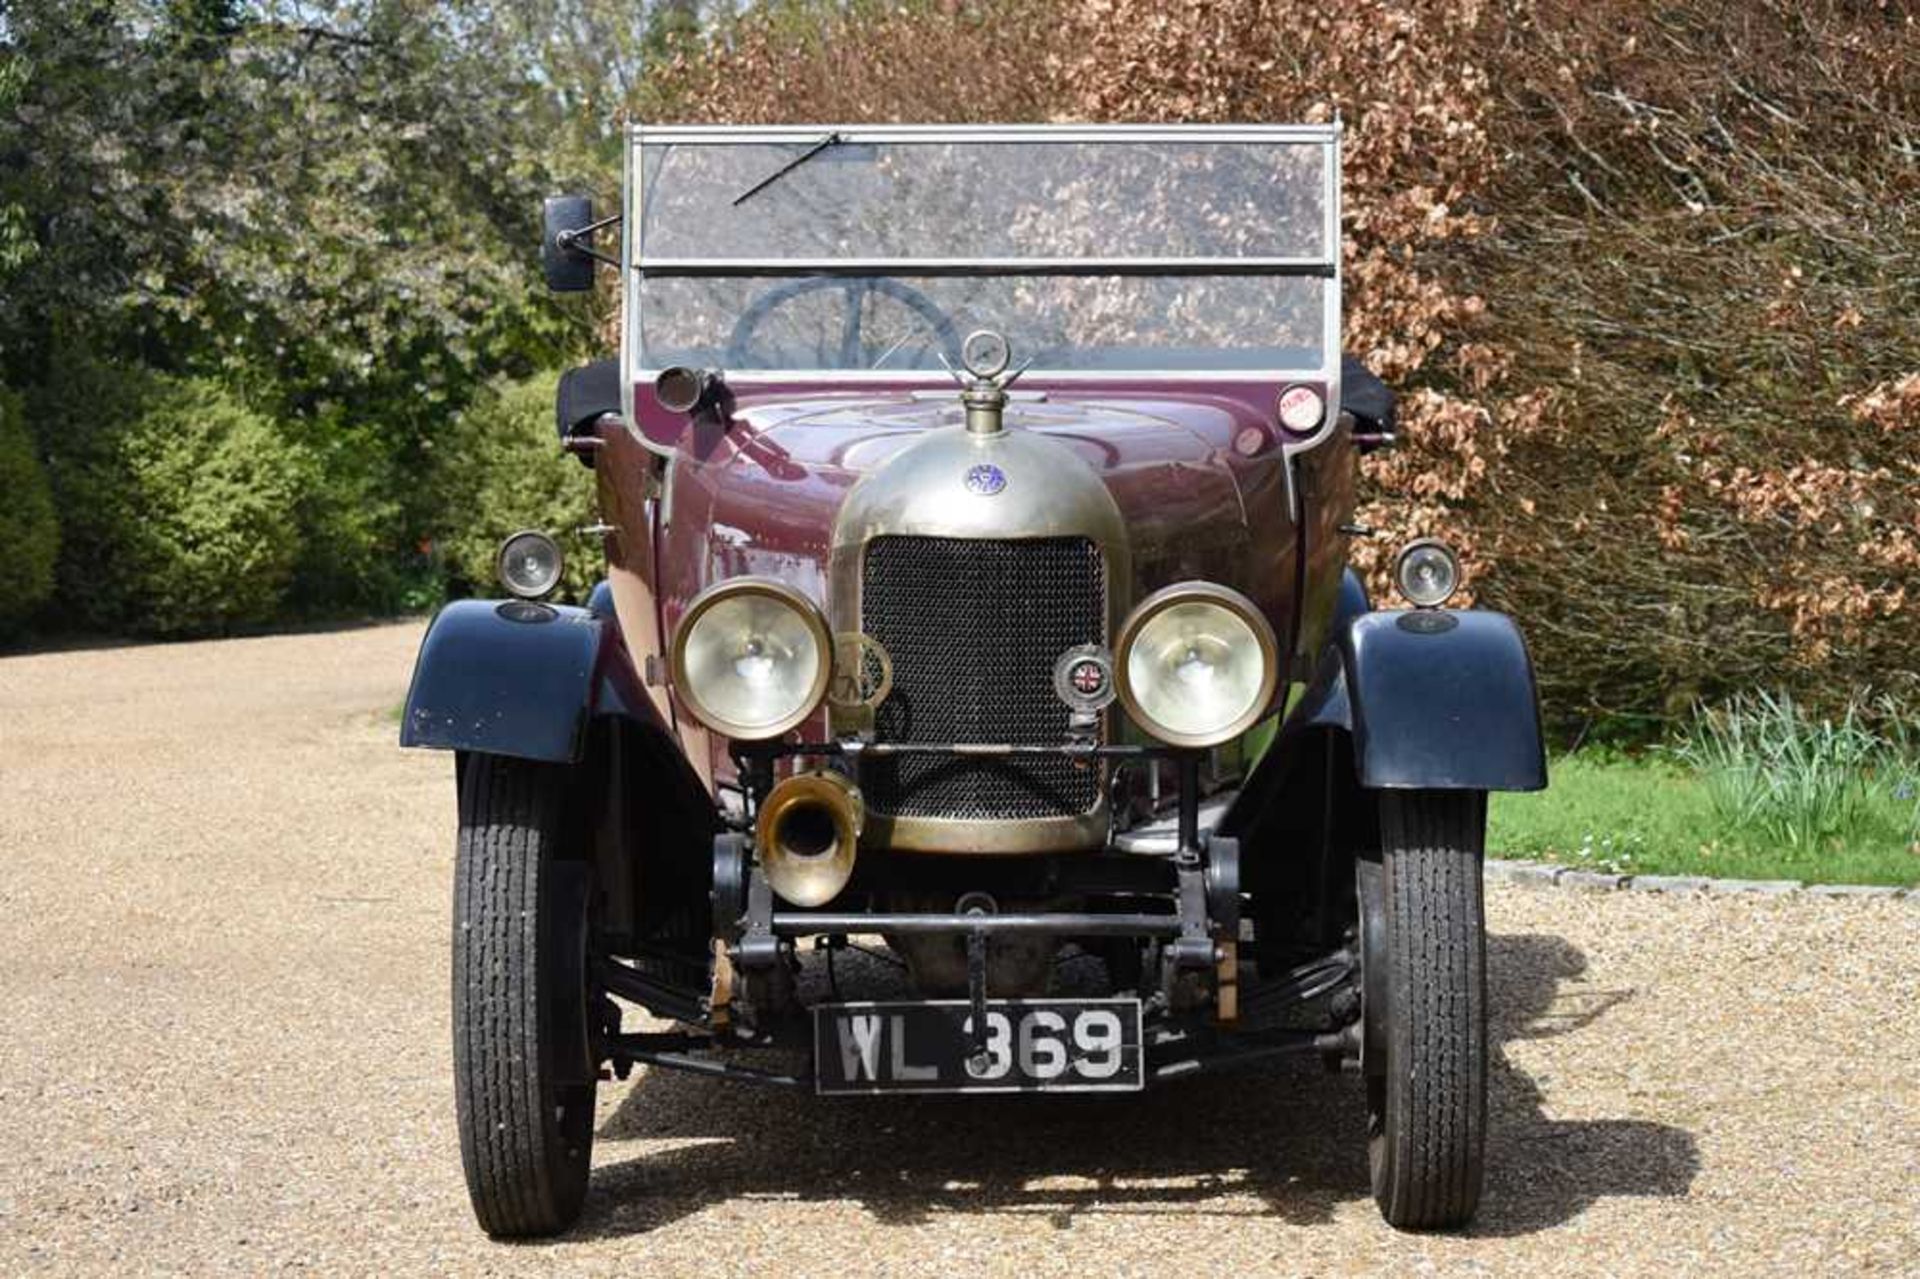 1926 Morris Oxford 'Bullnose' 2-Seat Tourer with Dickey - Image 3 of 99